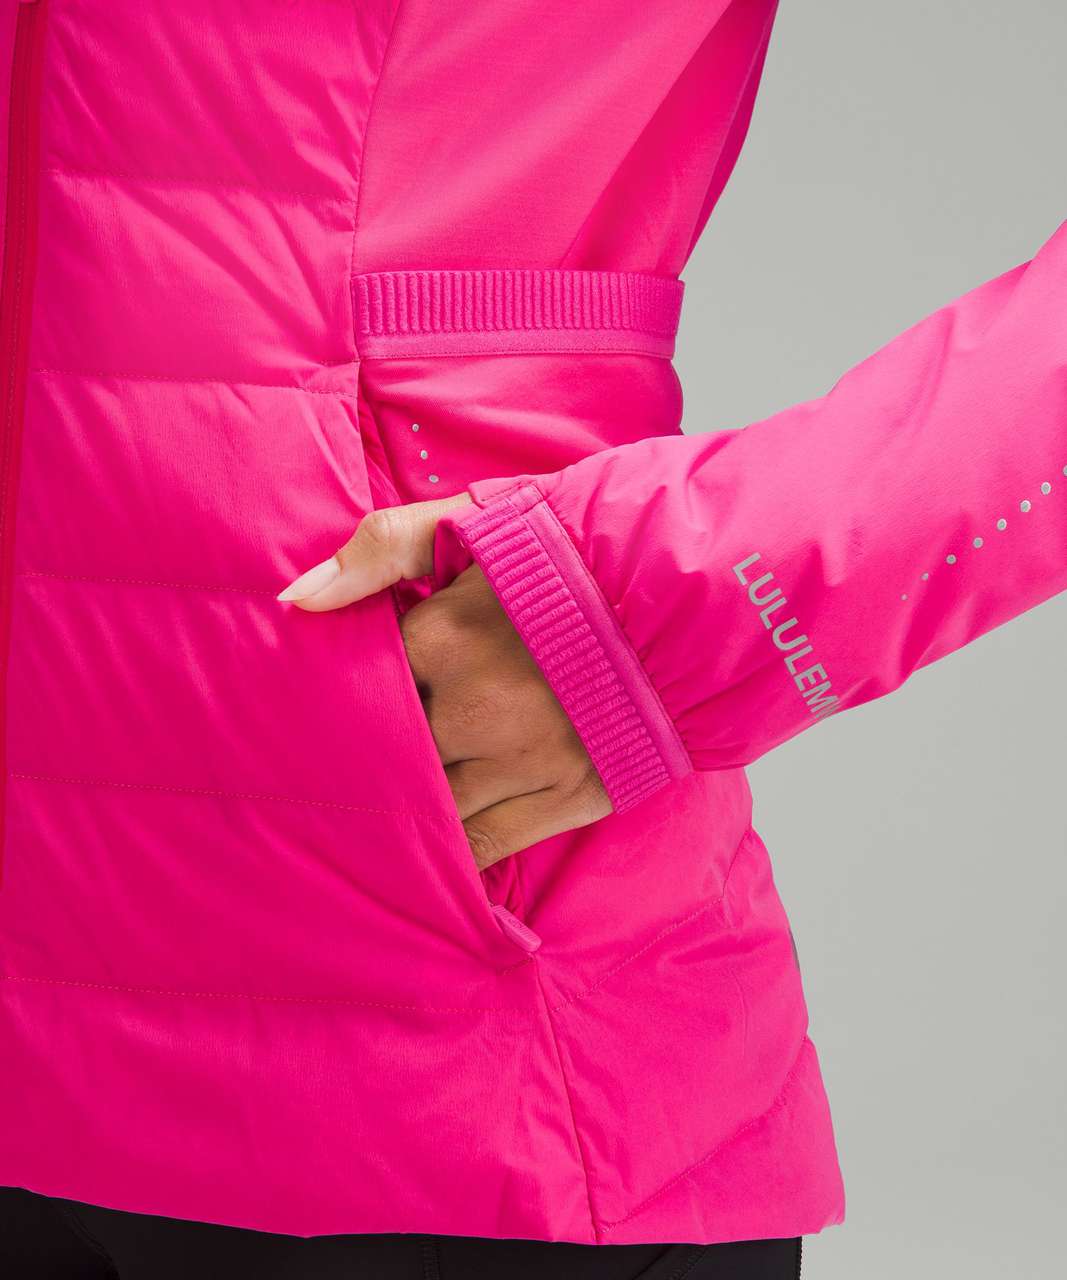 Lululemon Sonic Pink Jacket Size 4 - $90 (55% Off Retail) - From Claire